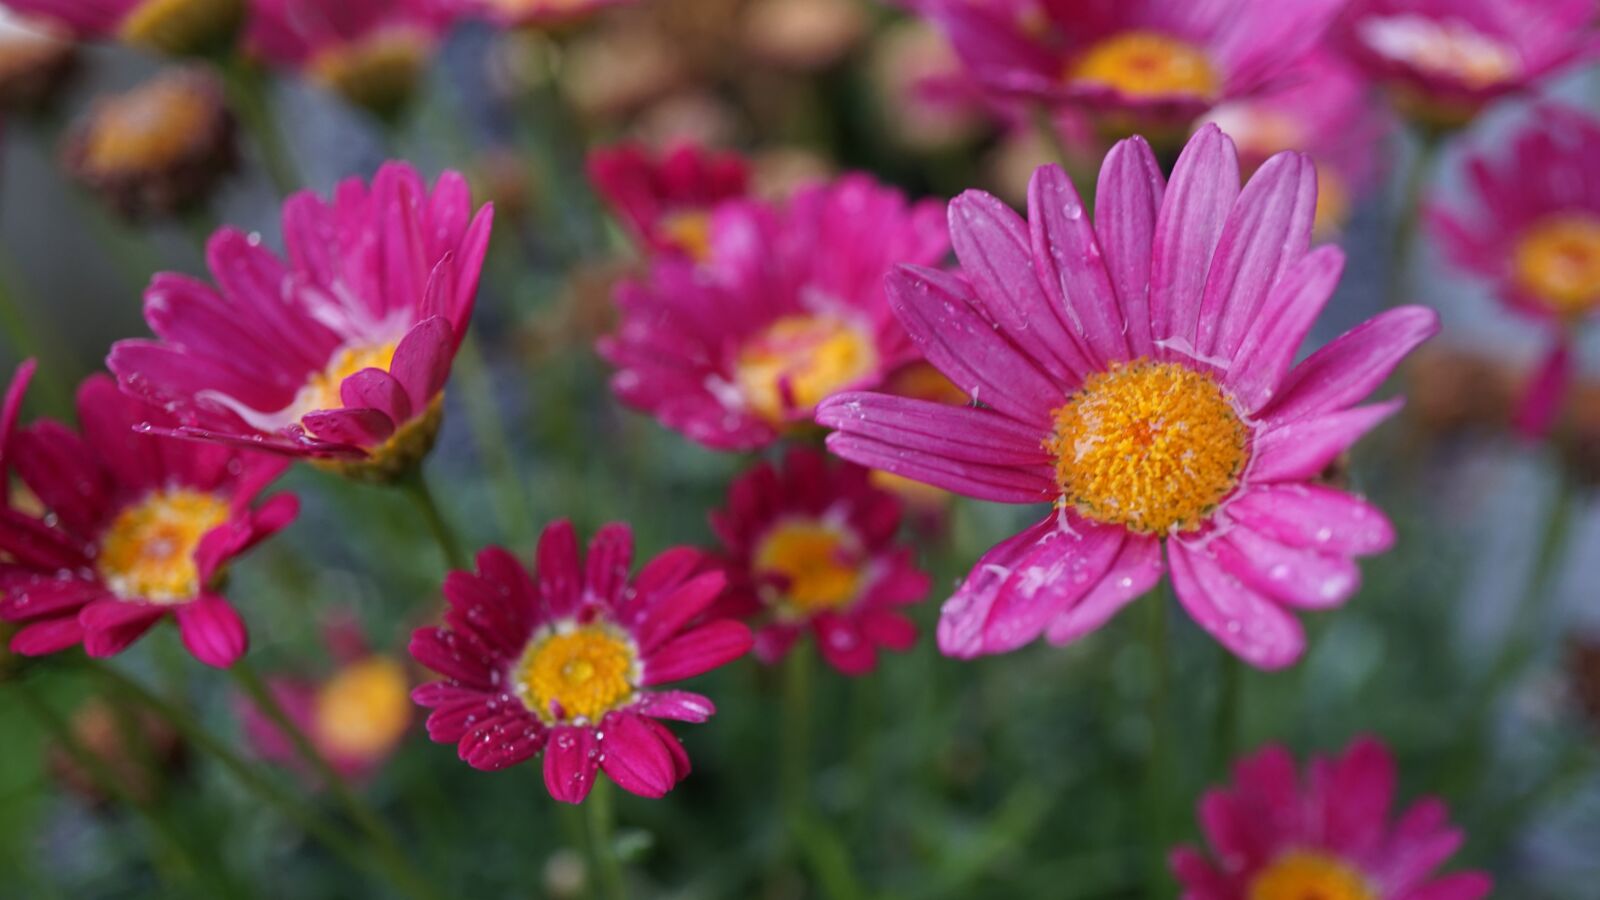 Sony a6000 sample photo. Pink daisies, flowers, nature photography